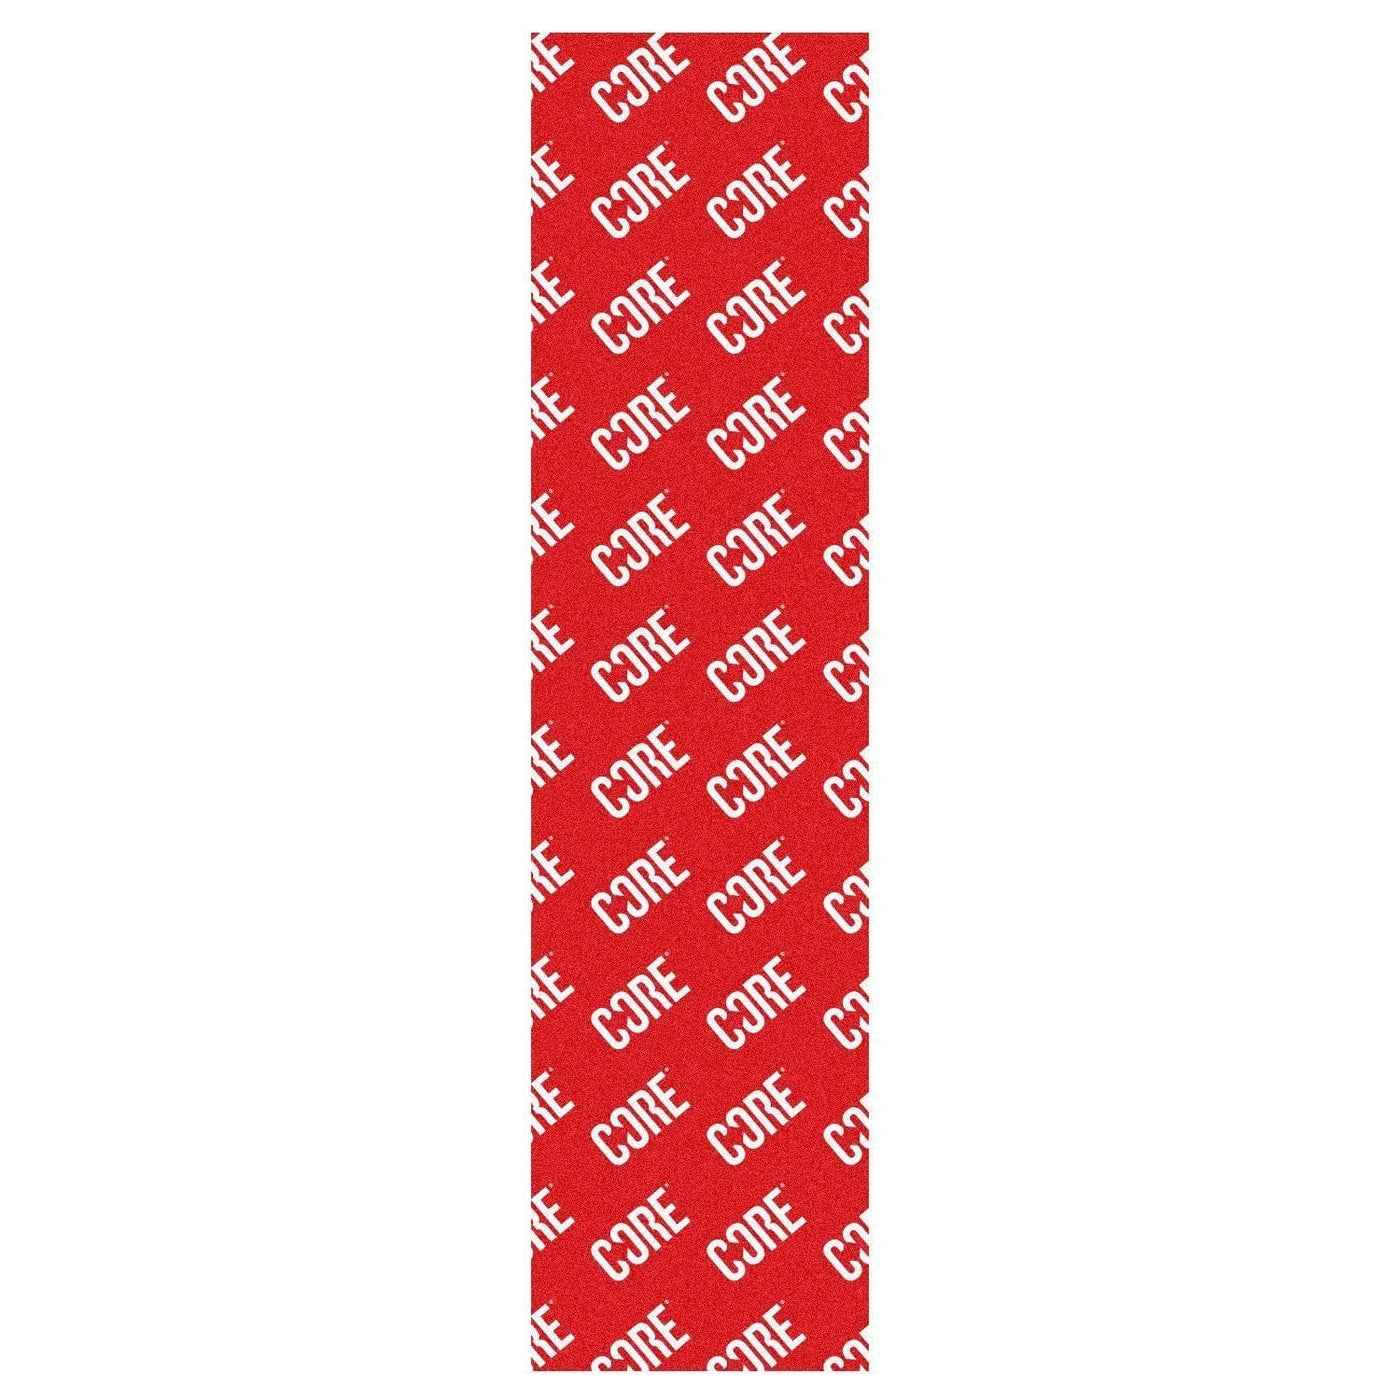 CORE Scooter Griptape Repeat - Red - CORE Protection